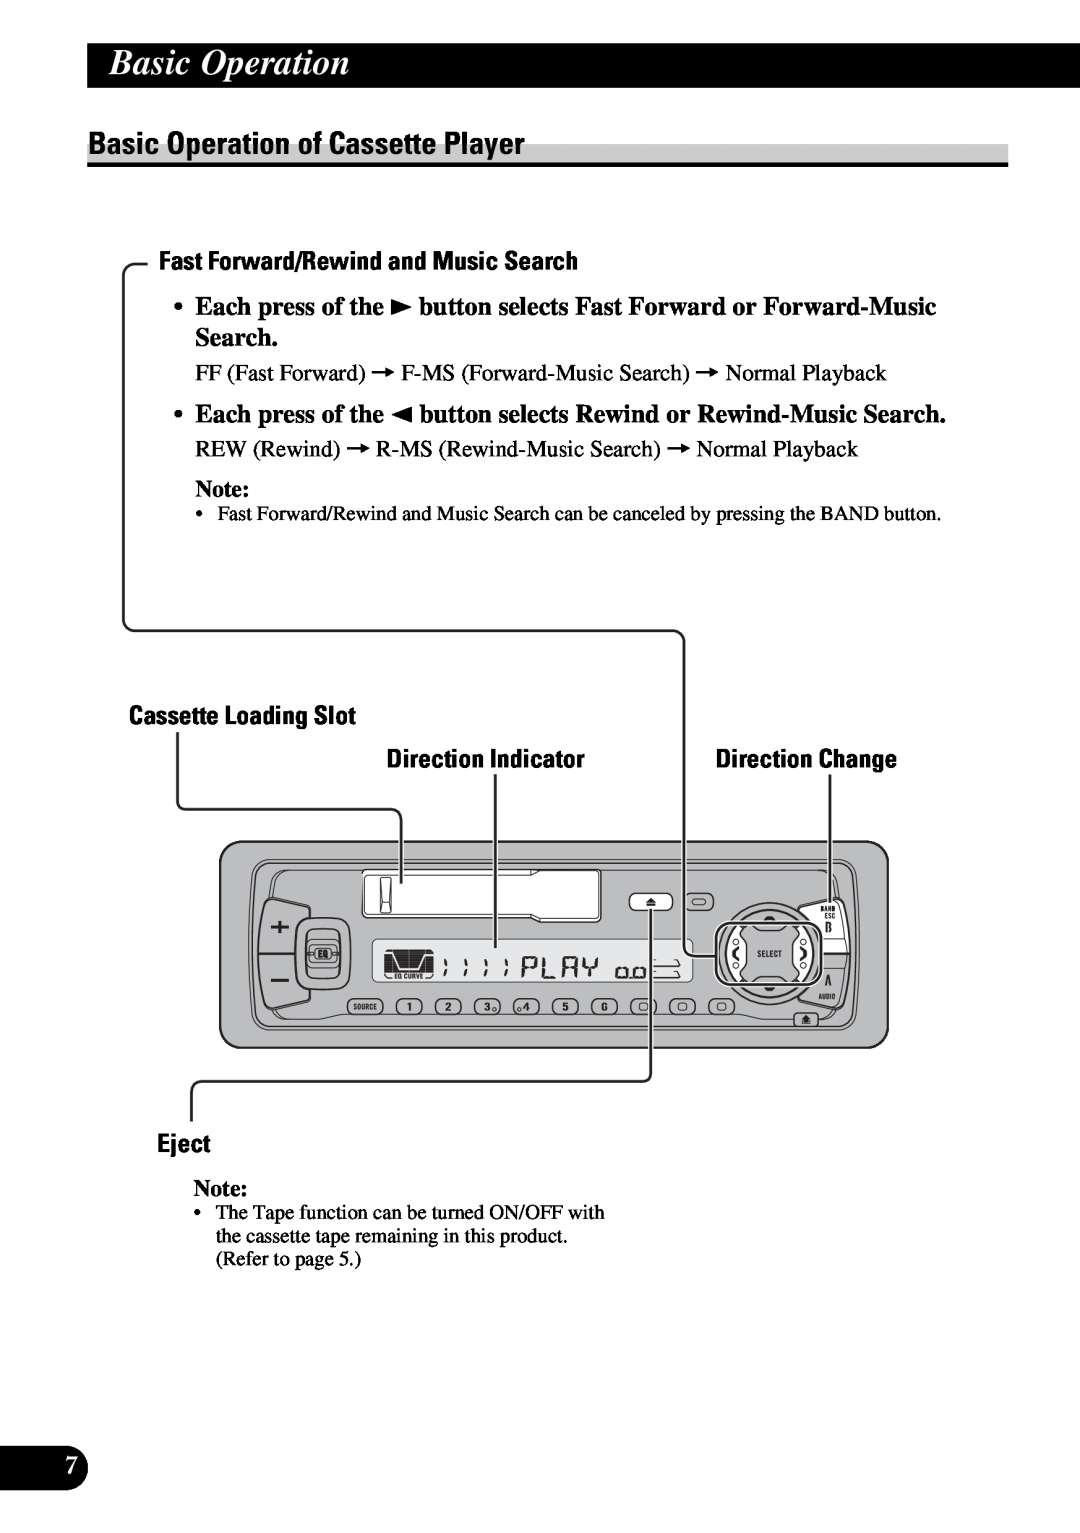 Pioneer KEH-P4950 Basic Operation of Cassette Player, Fast Forward/Rewind and Music Search, Cassette Loading Slot, Eject 